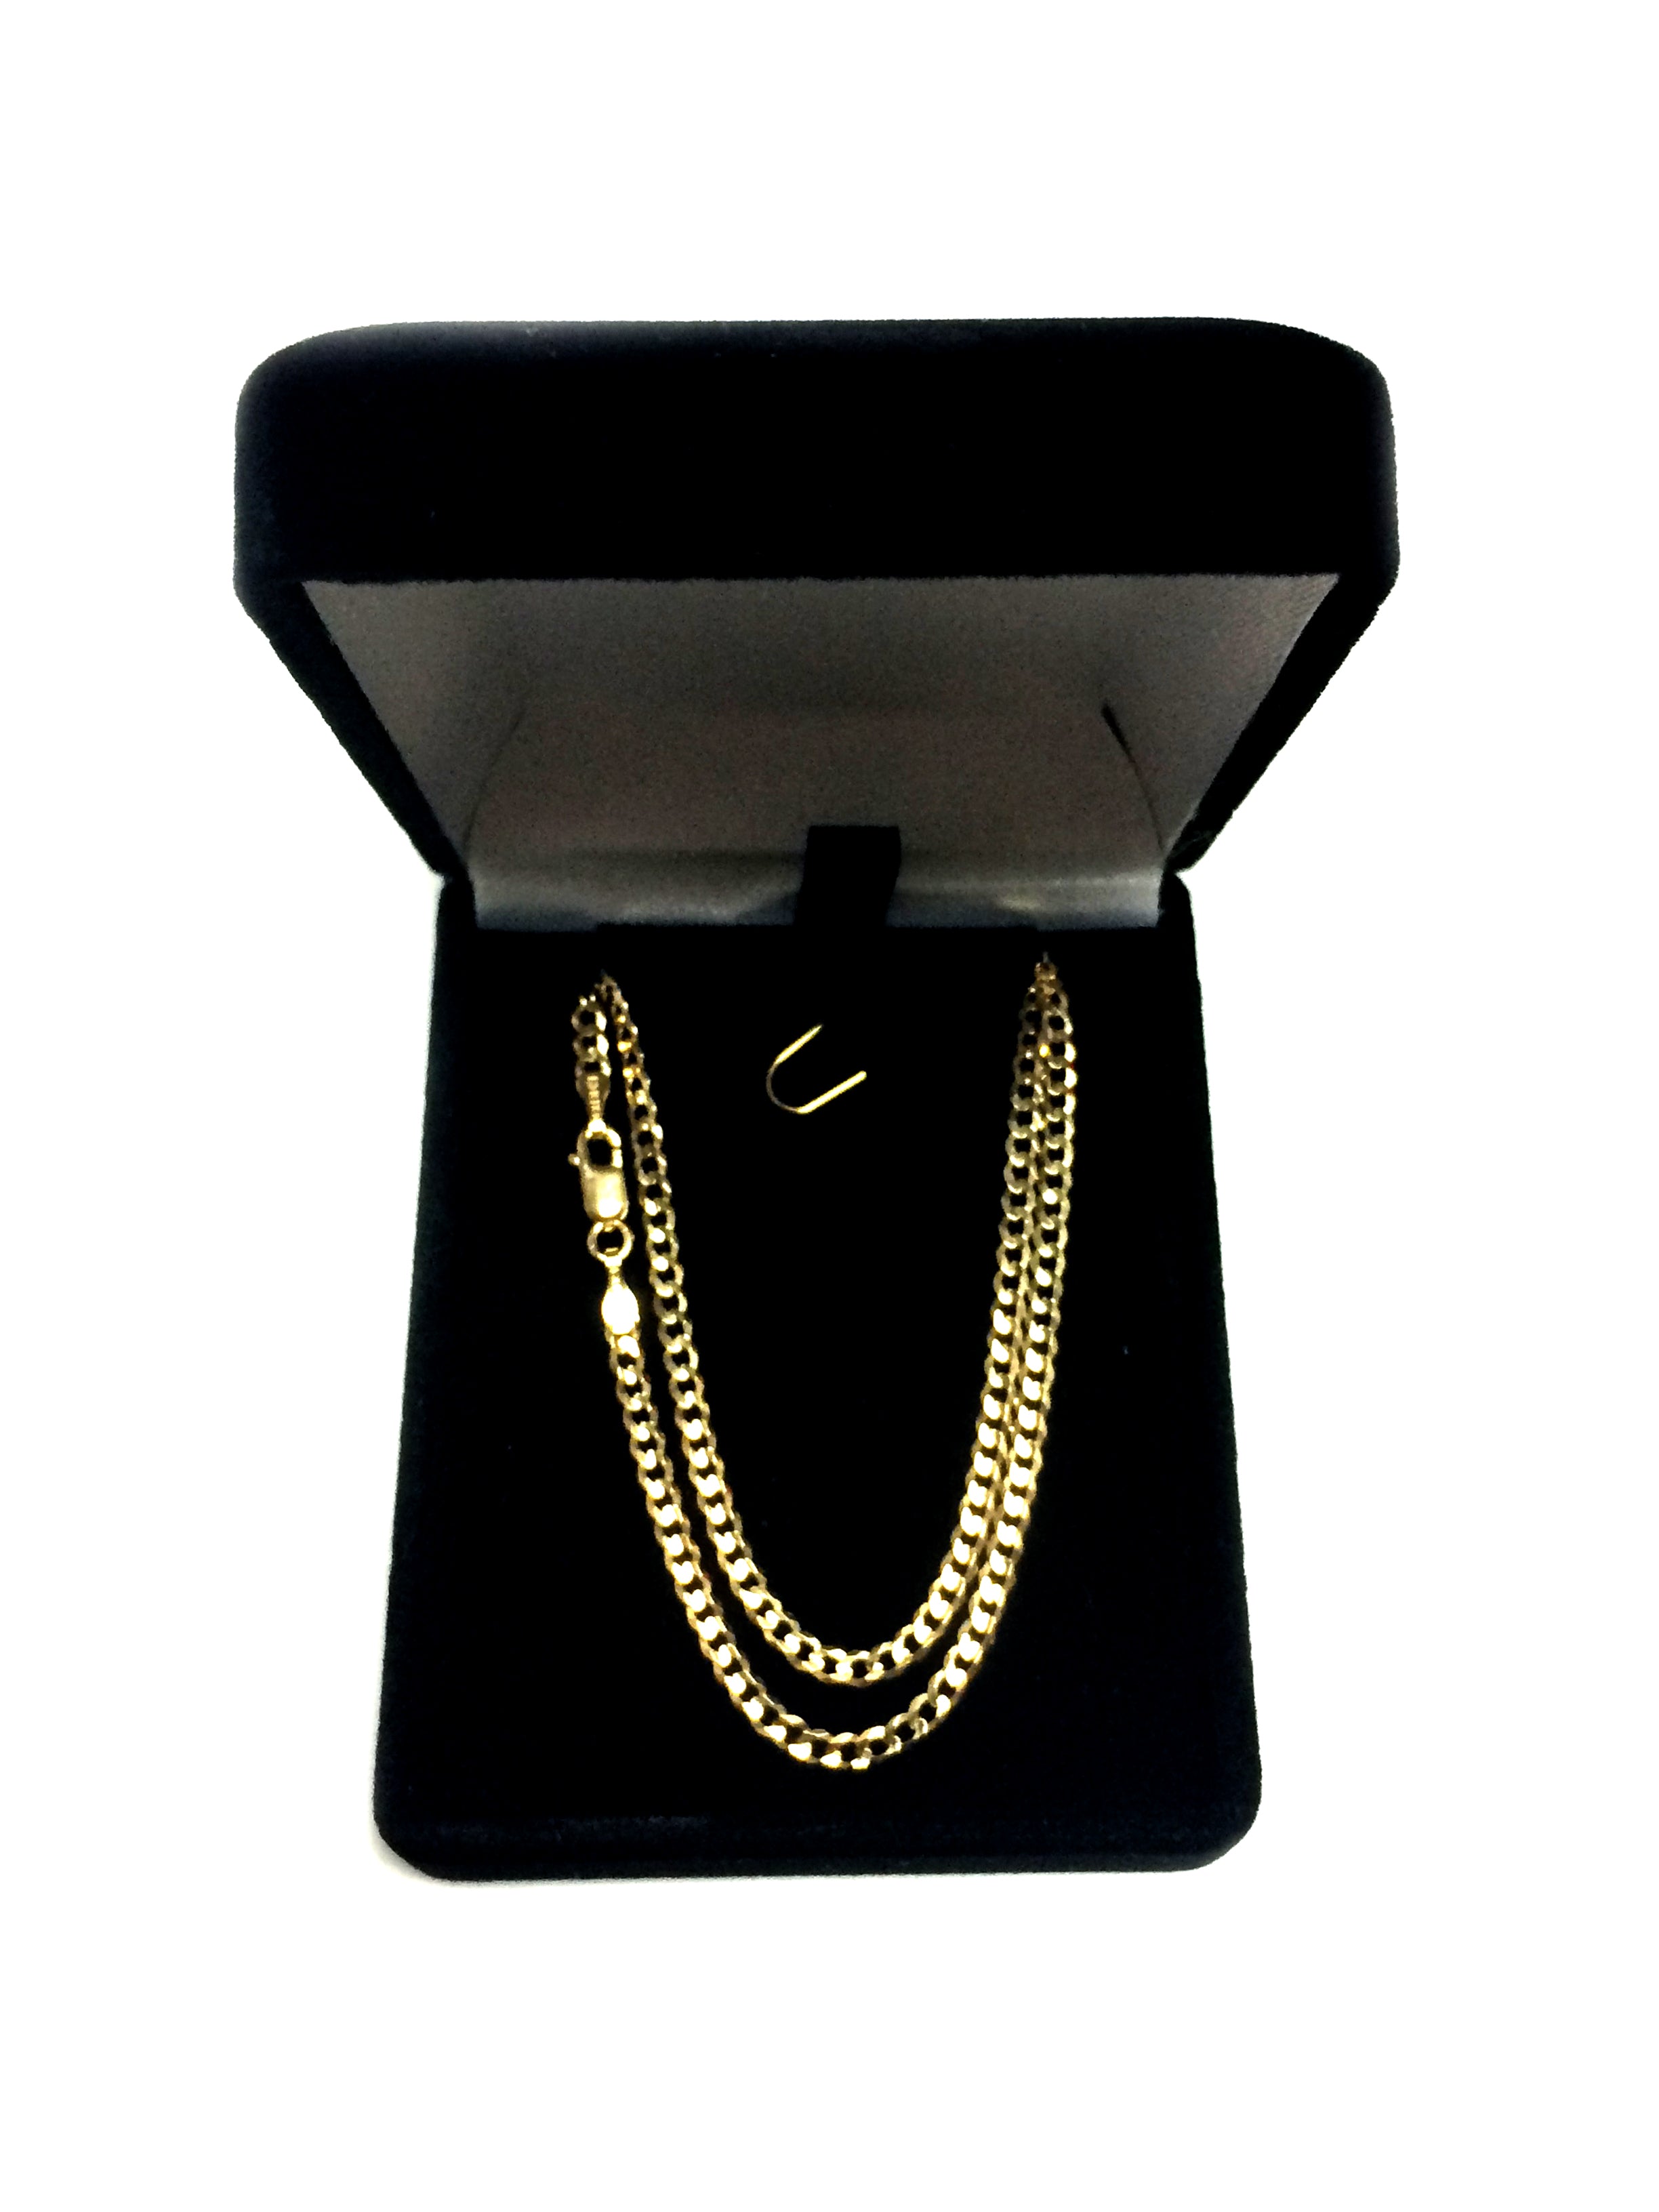 14k Yellow Gold Comfort Curb Chain Necklace, 2.7mm